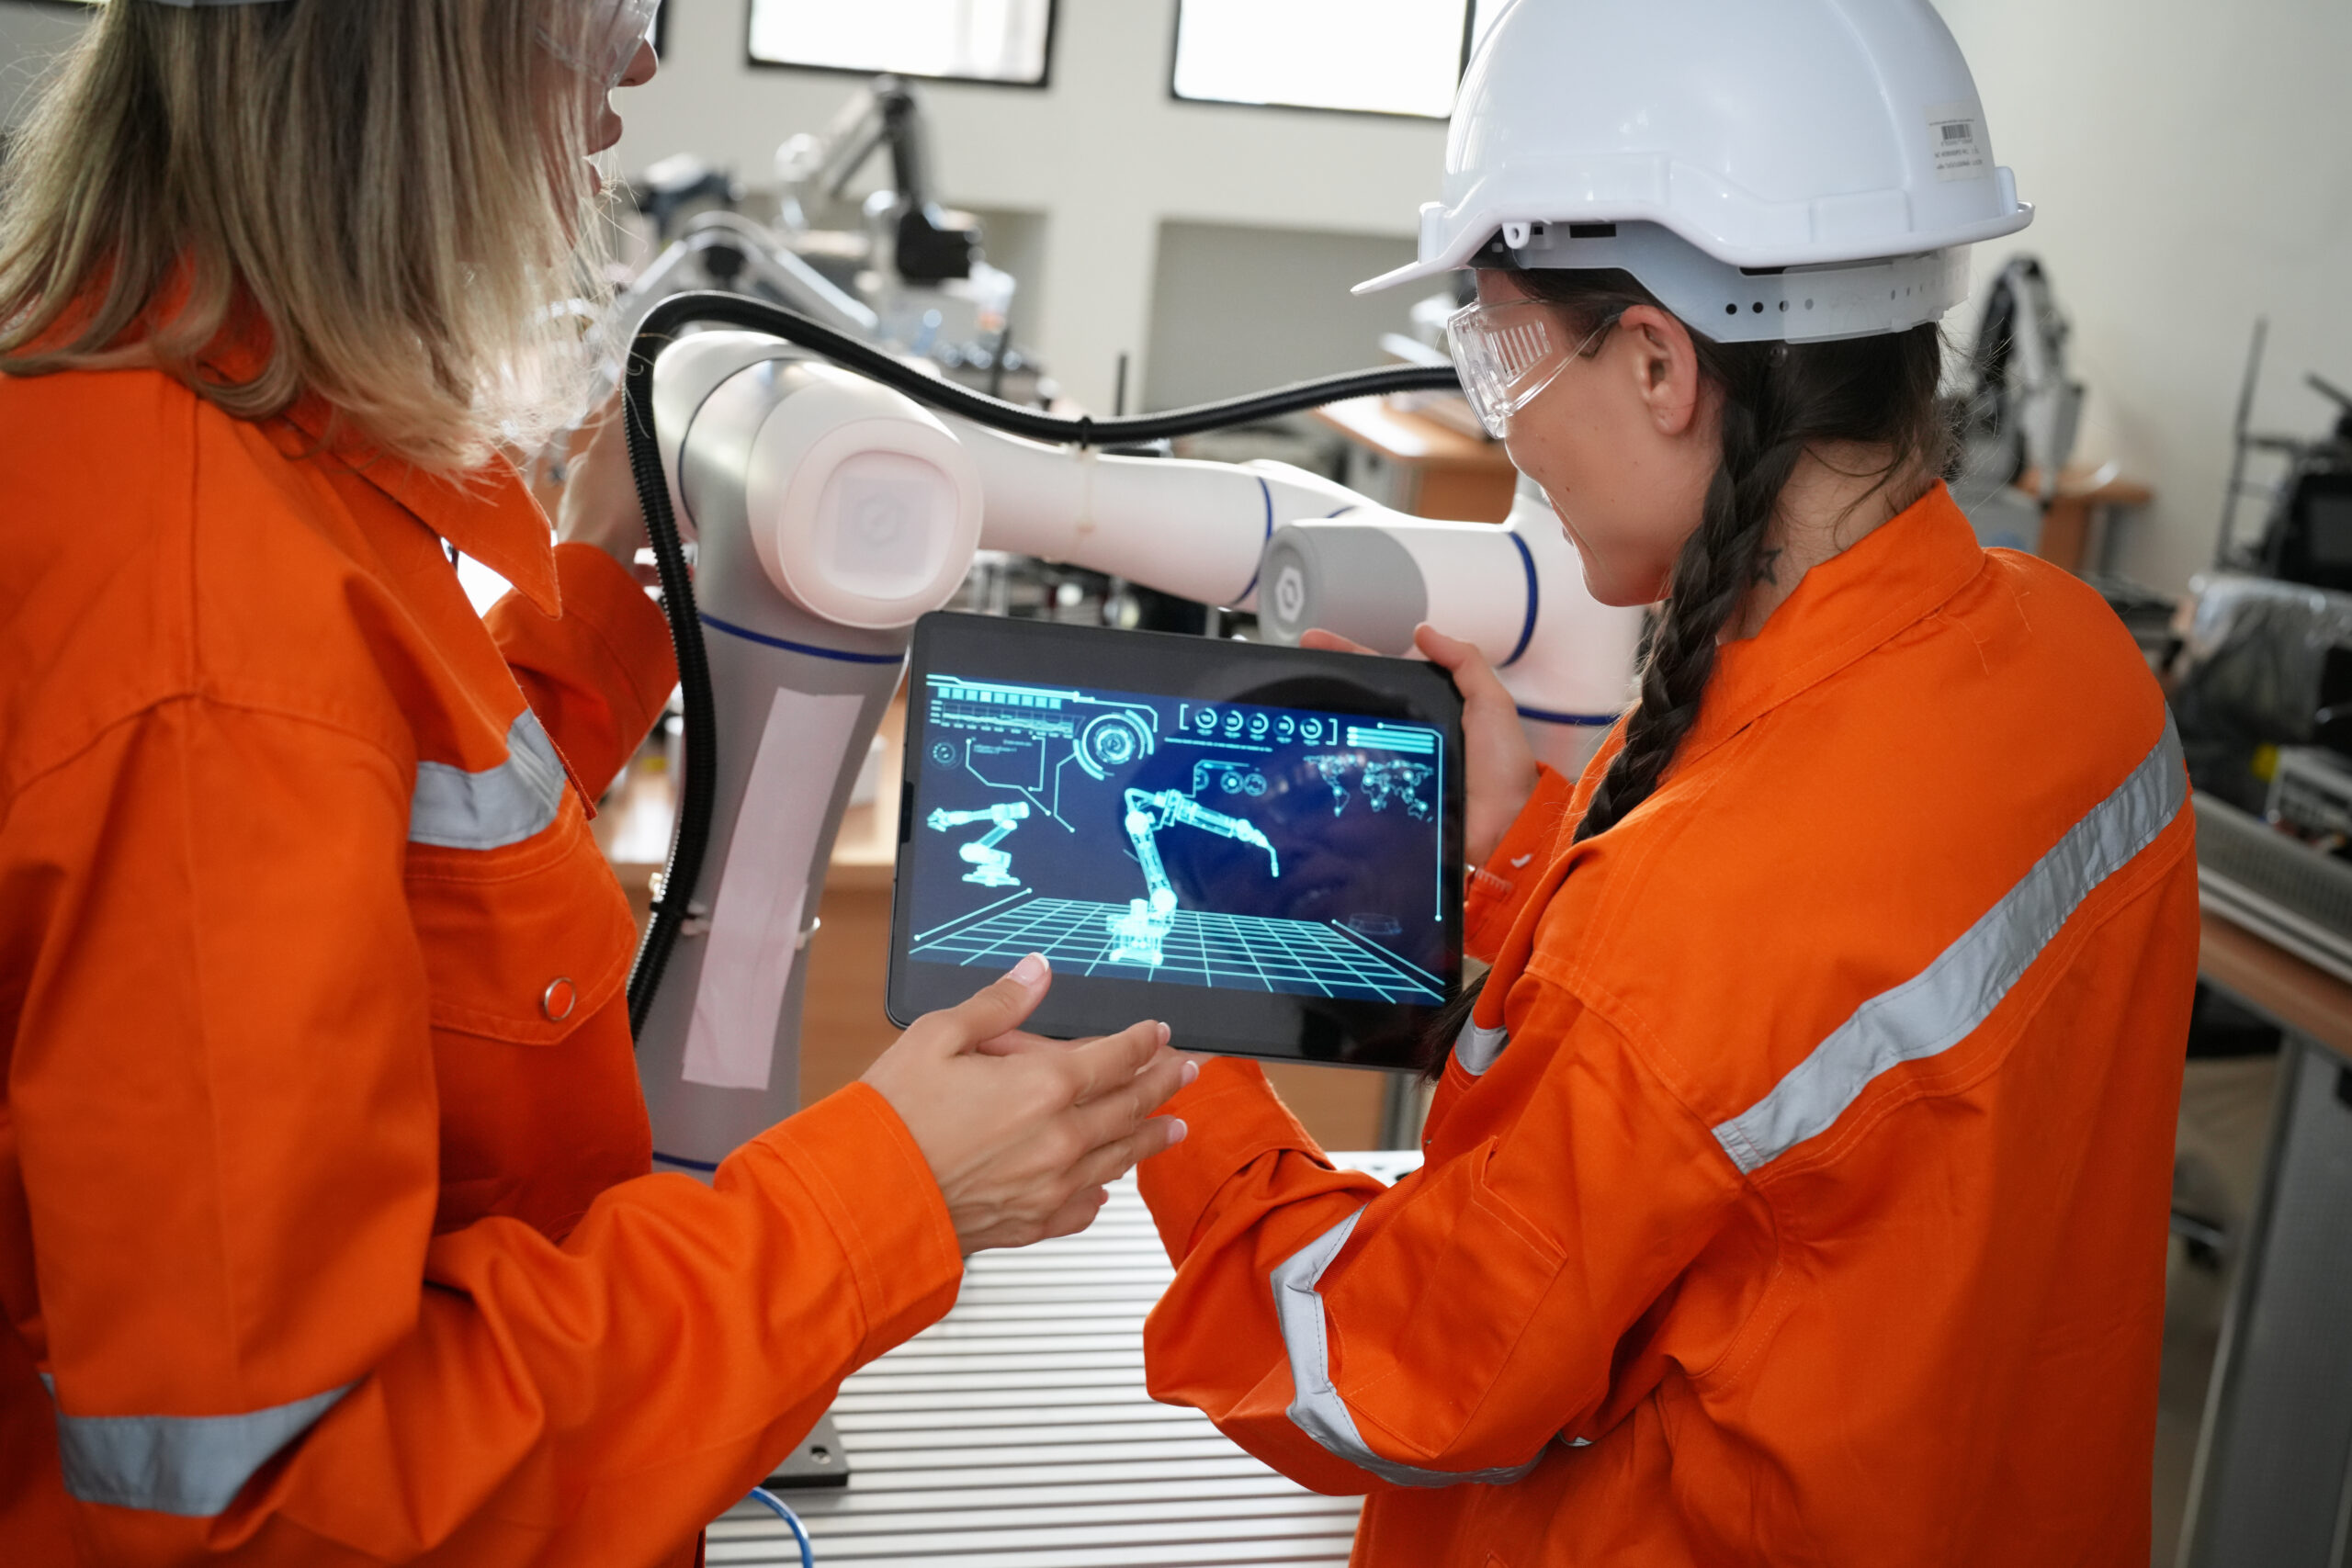 Industry 4.0 and Augmented Reality: The Digital Transformation of Manufacturing